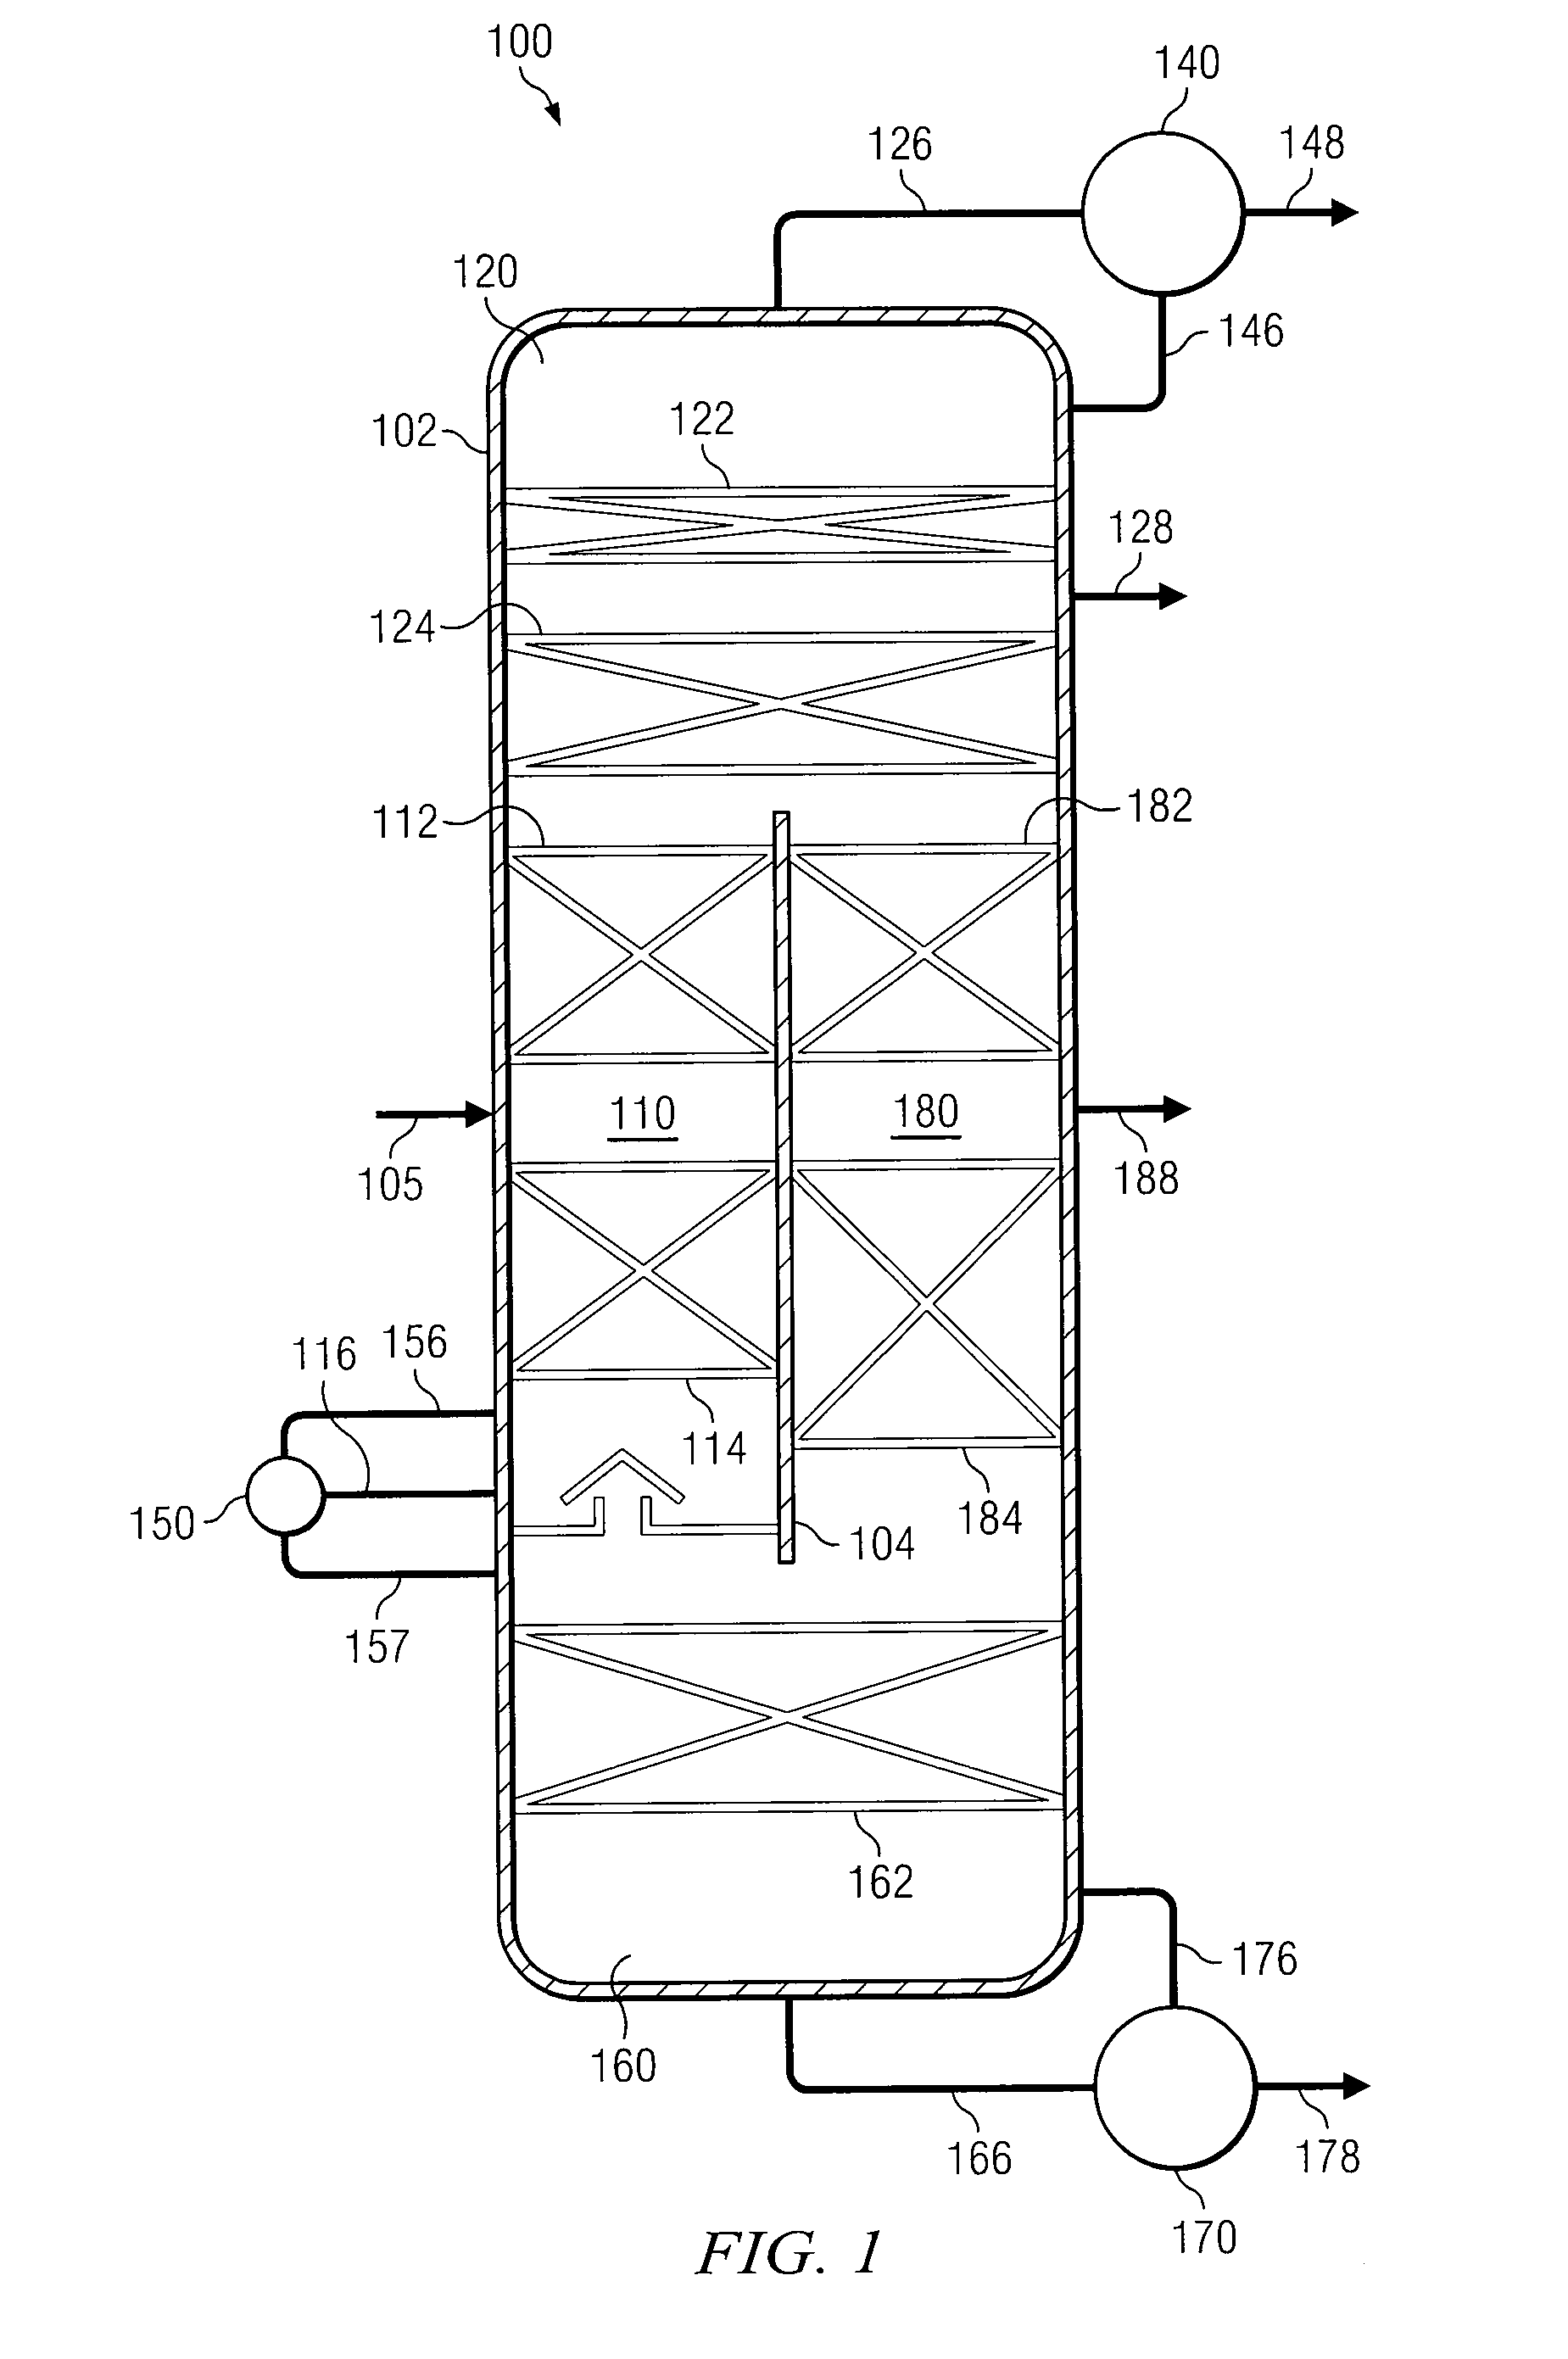 Apparatus, Systems, and Methods for Purification of Isocyanate Mixtures